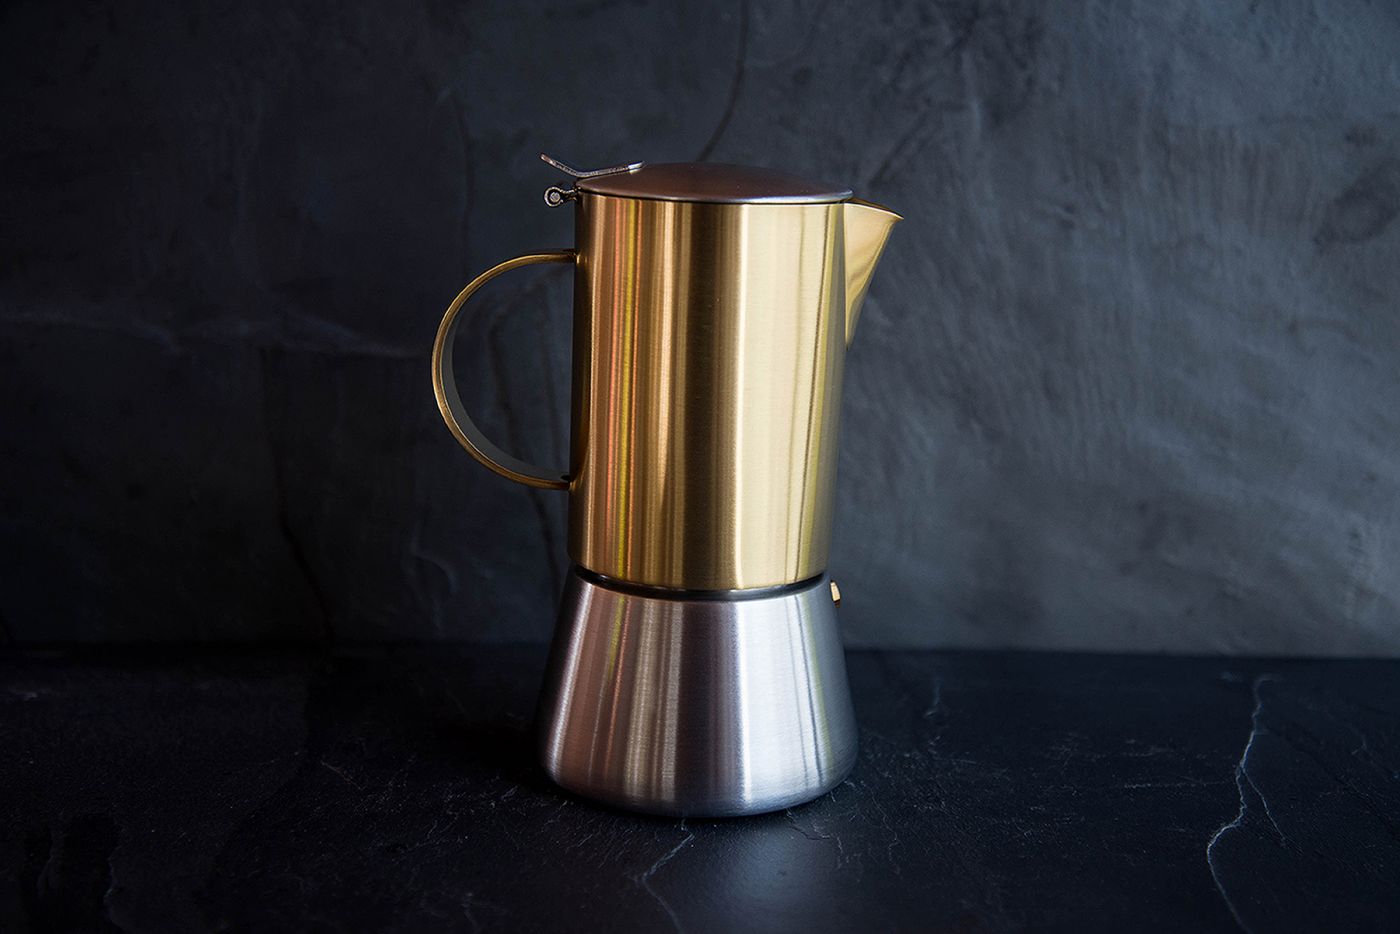 Brushed Gold Stainless Steel Stovetop Espresso Maker